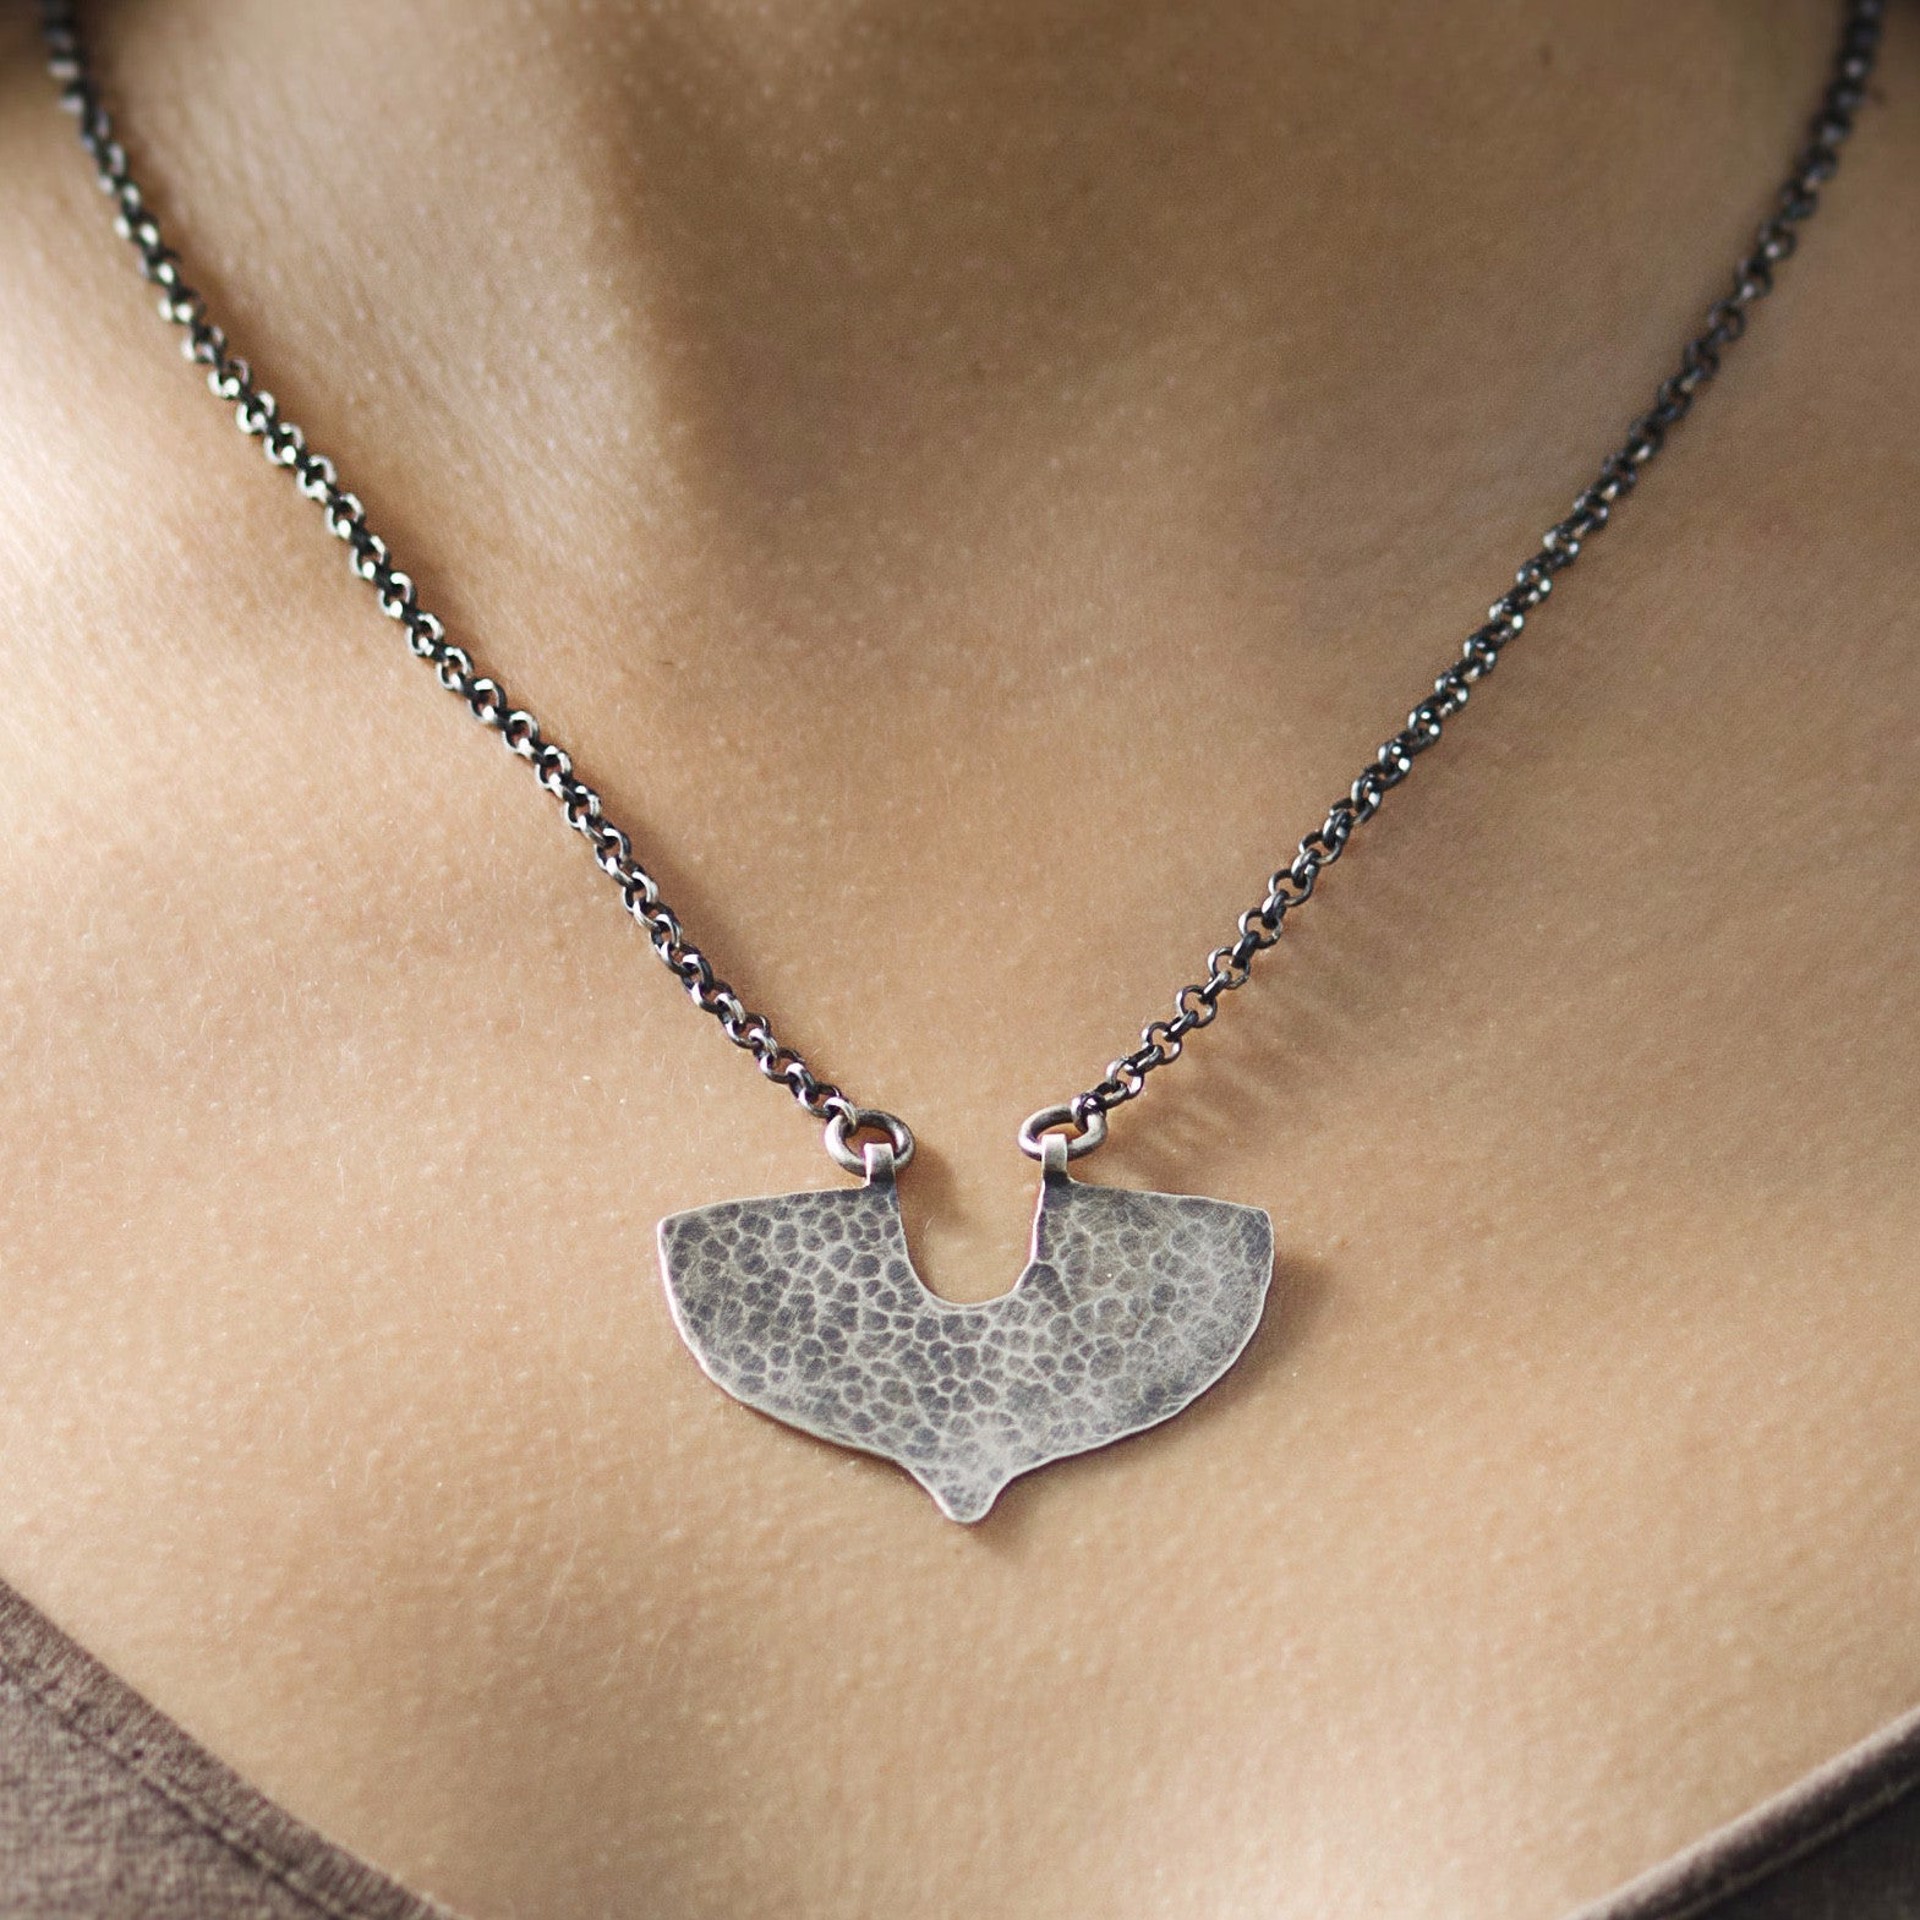 Shield Necklace in Silver by Clementine & Co. Jewelry